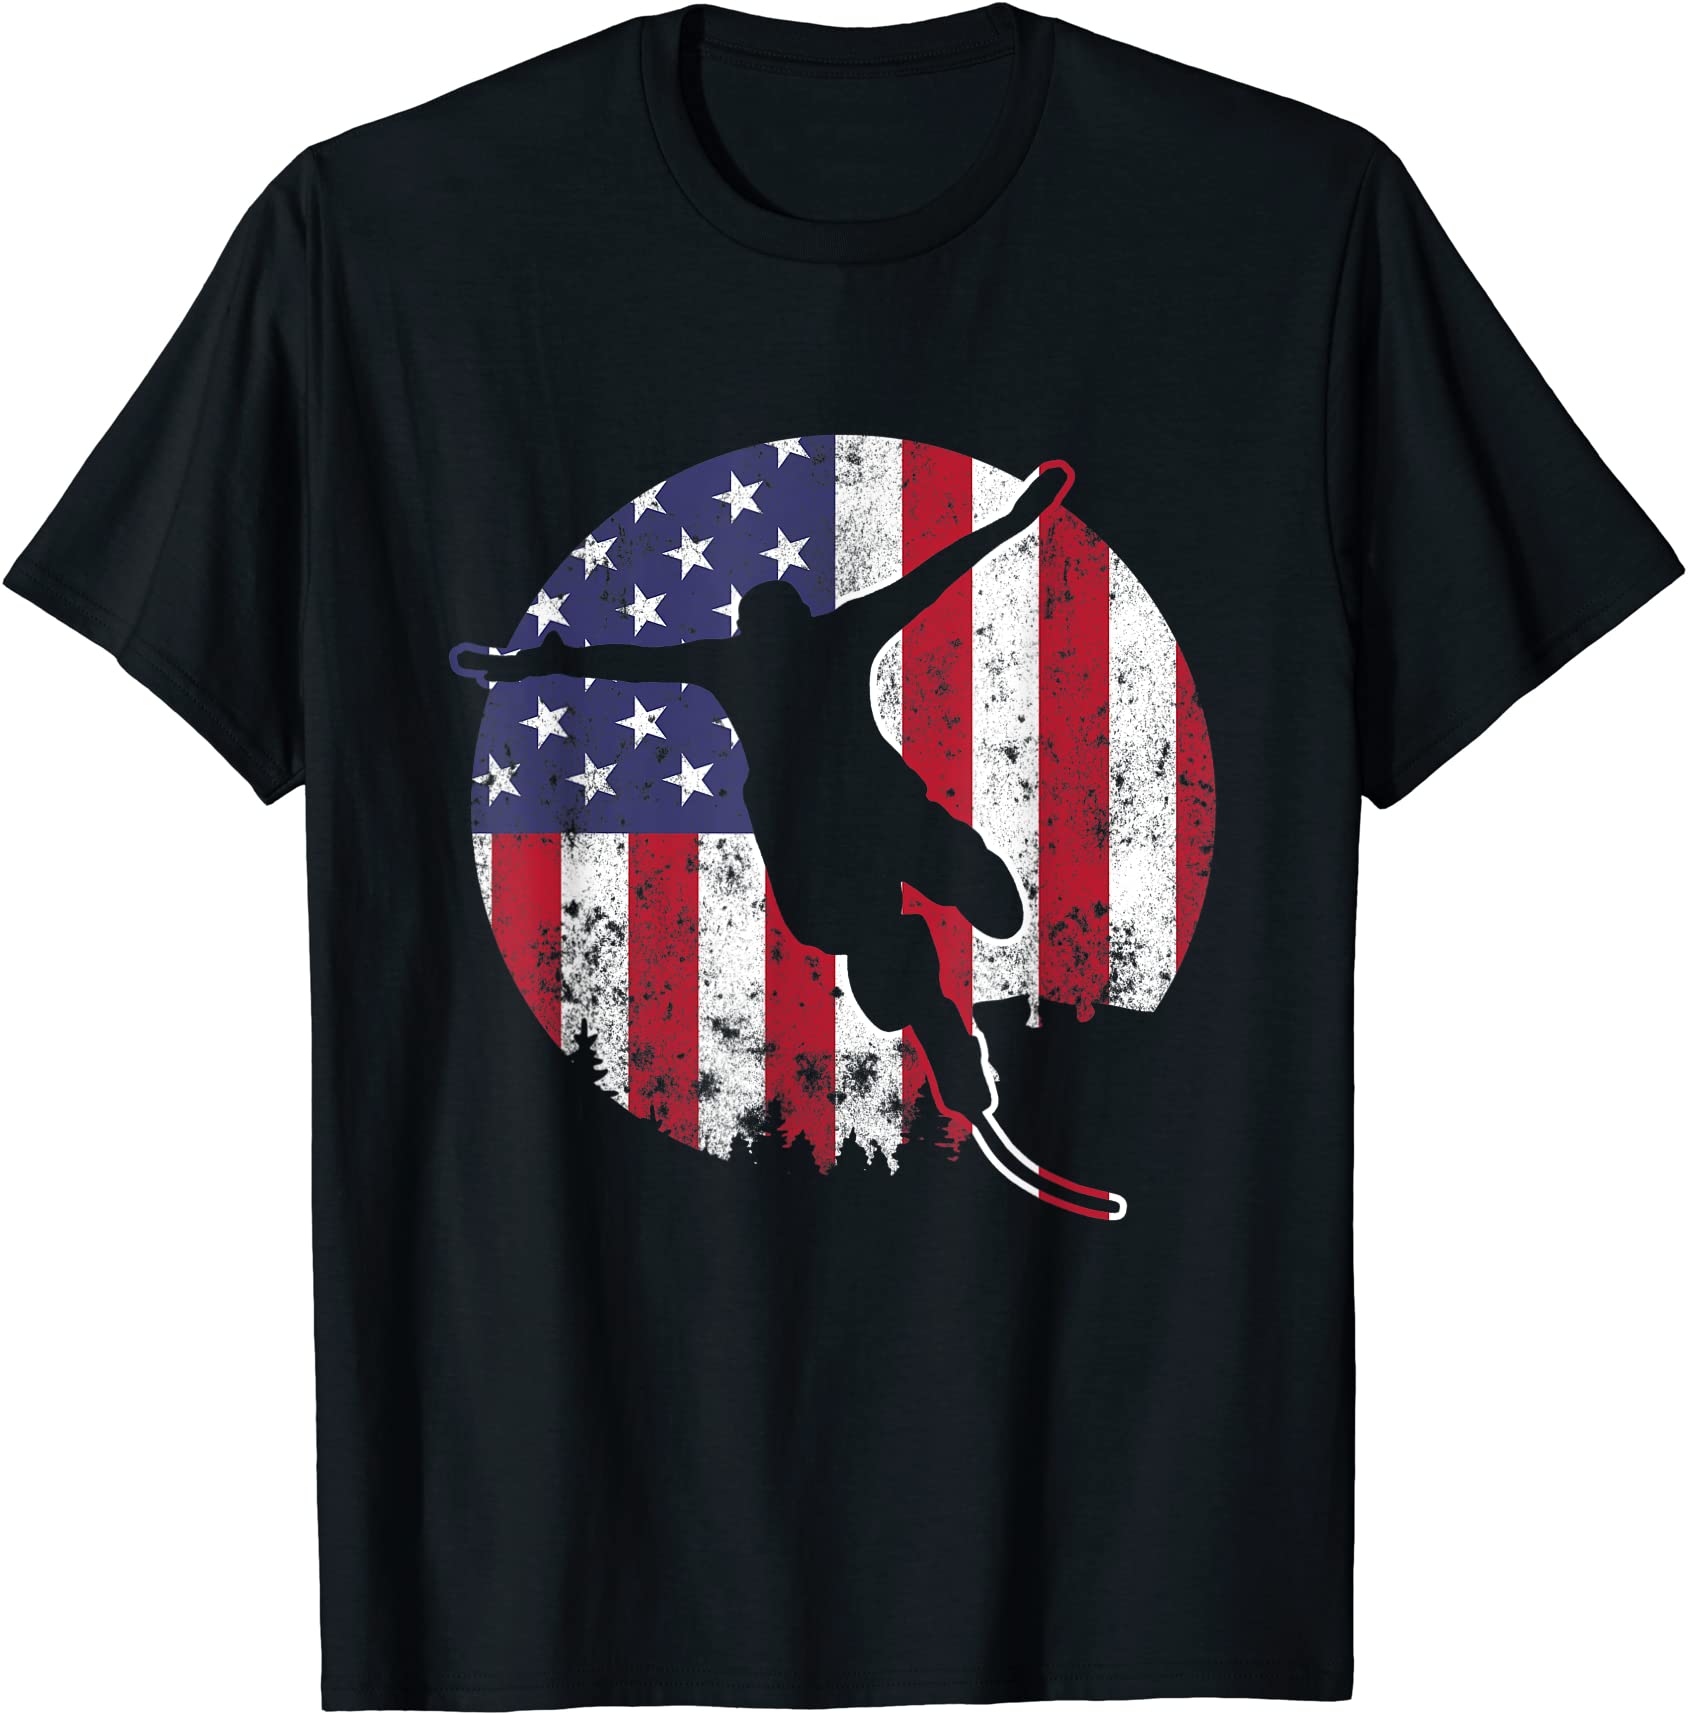 bungee jumping america flag bungy jumping flag t shirt men - Buy t ...